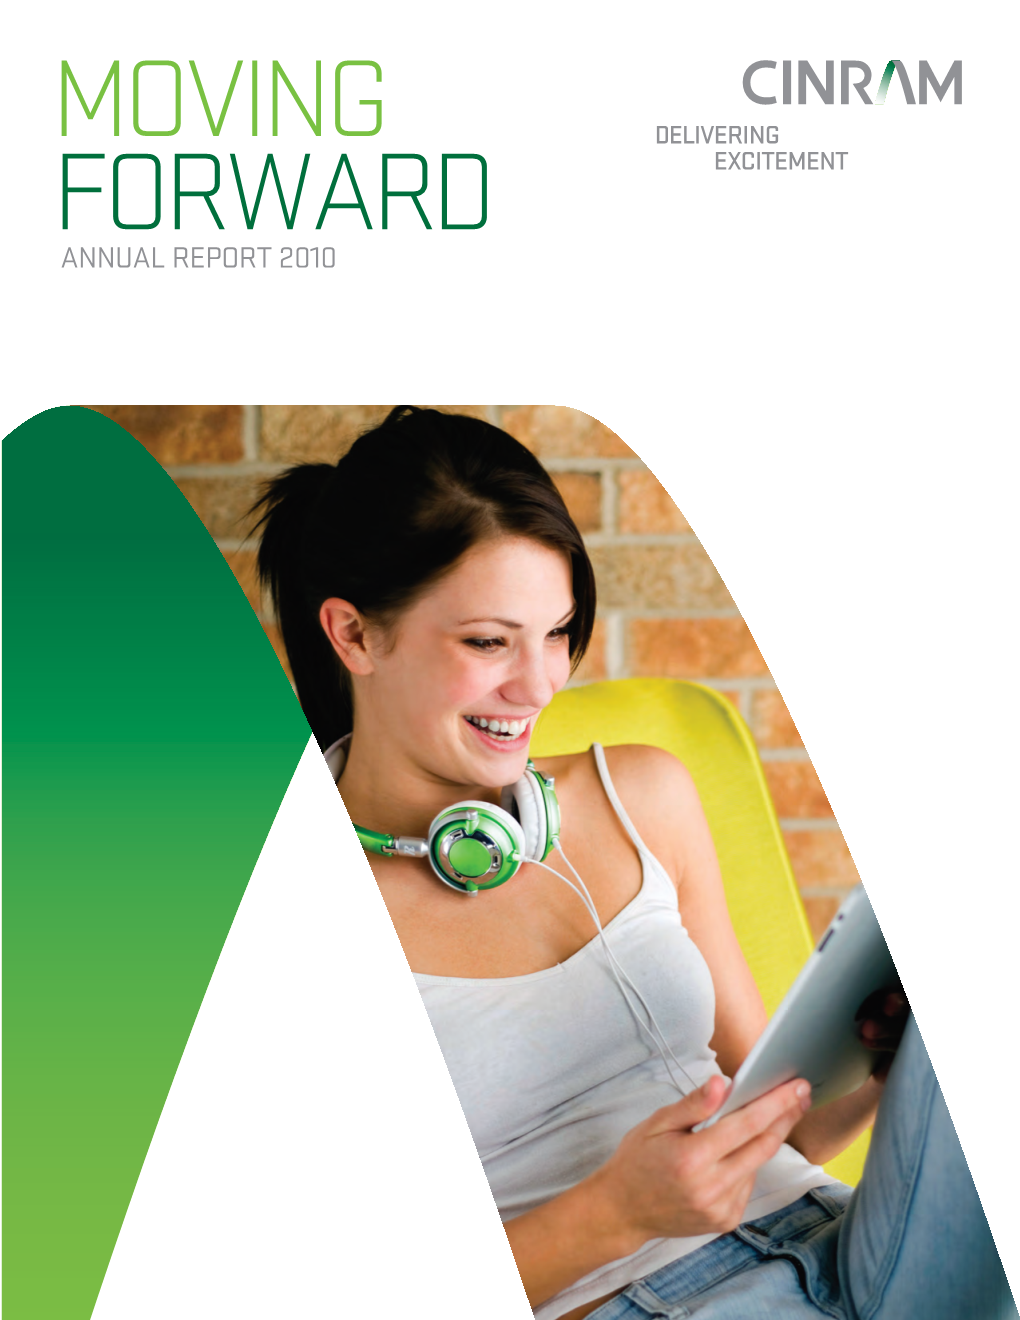 Moving Forward Annual Report 2010 About Cinram